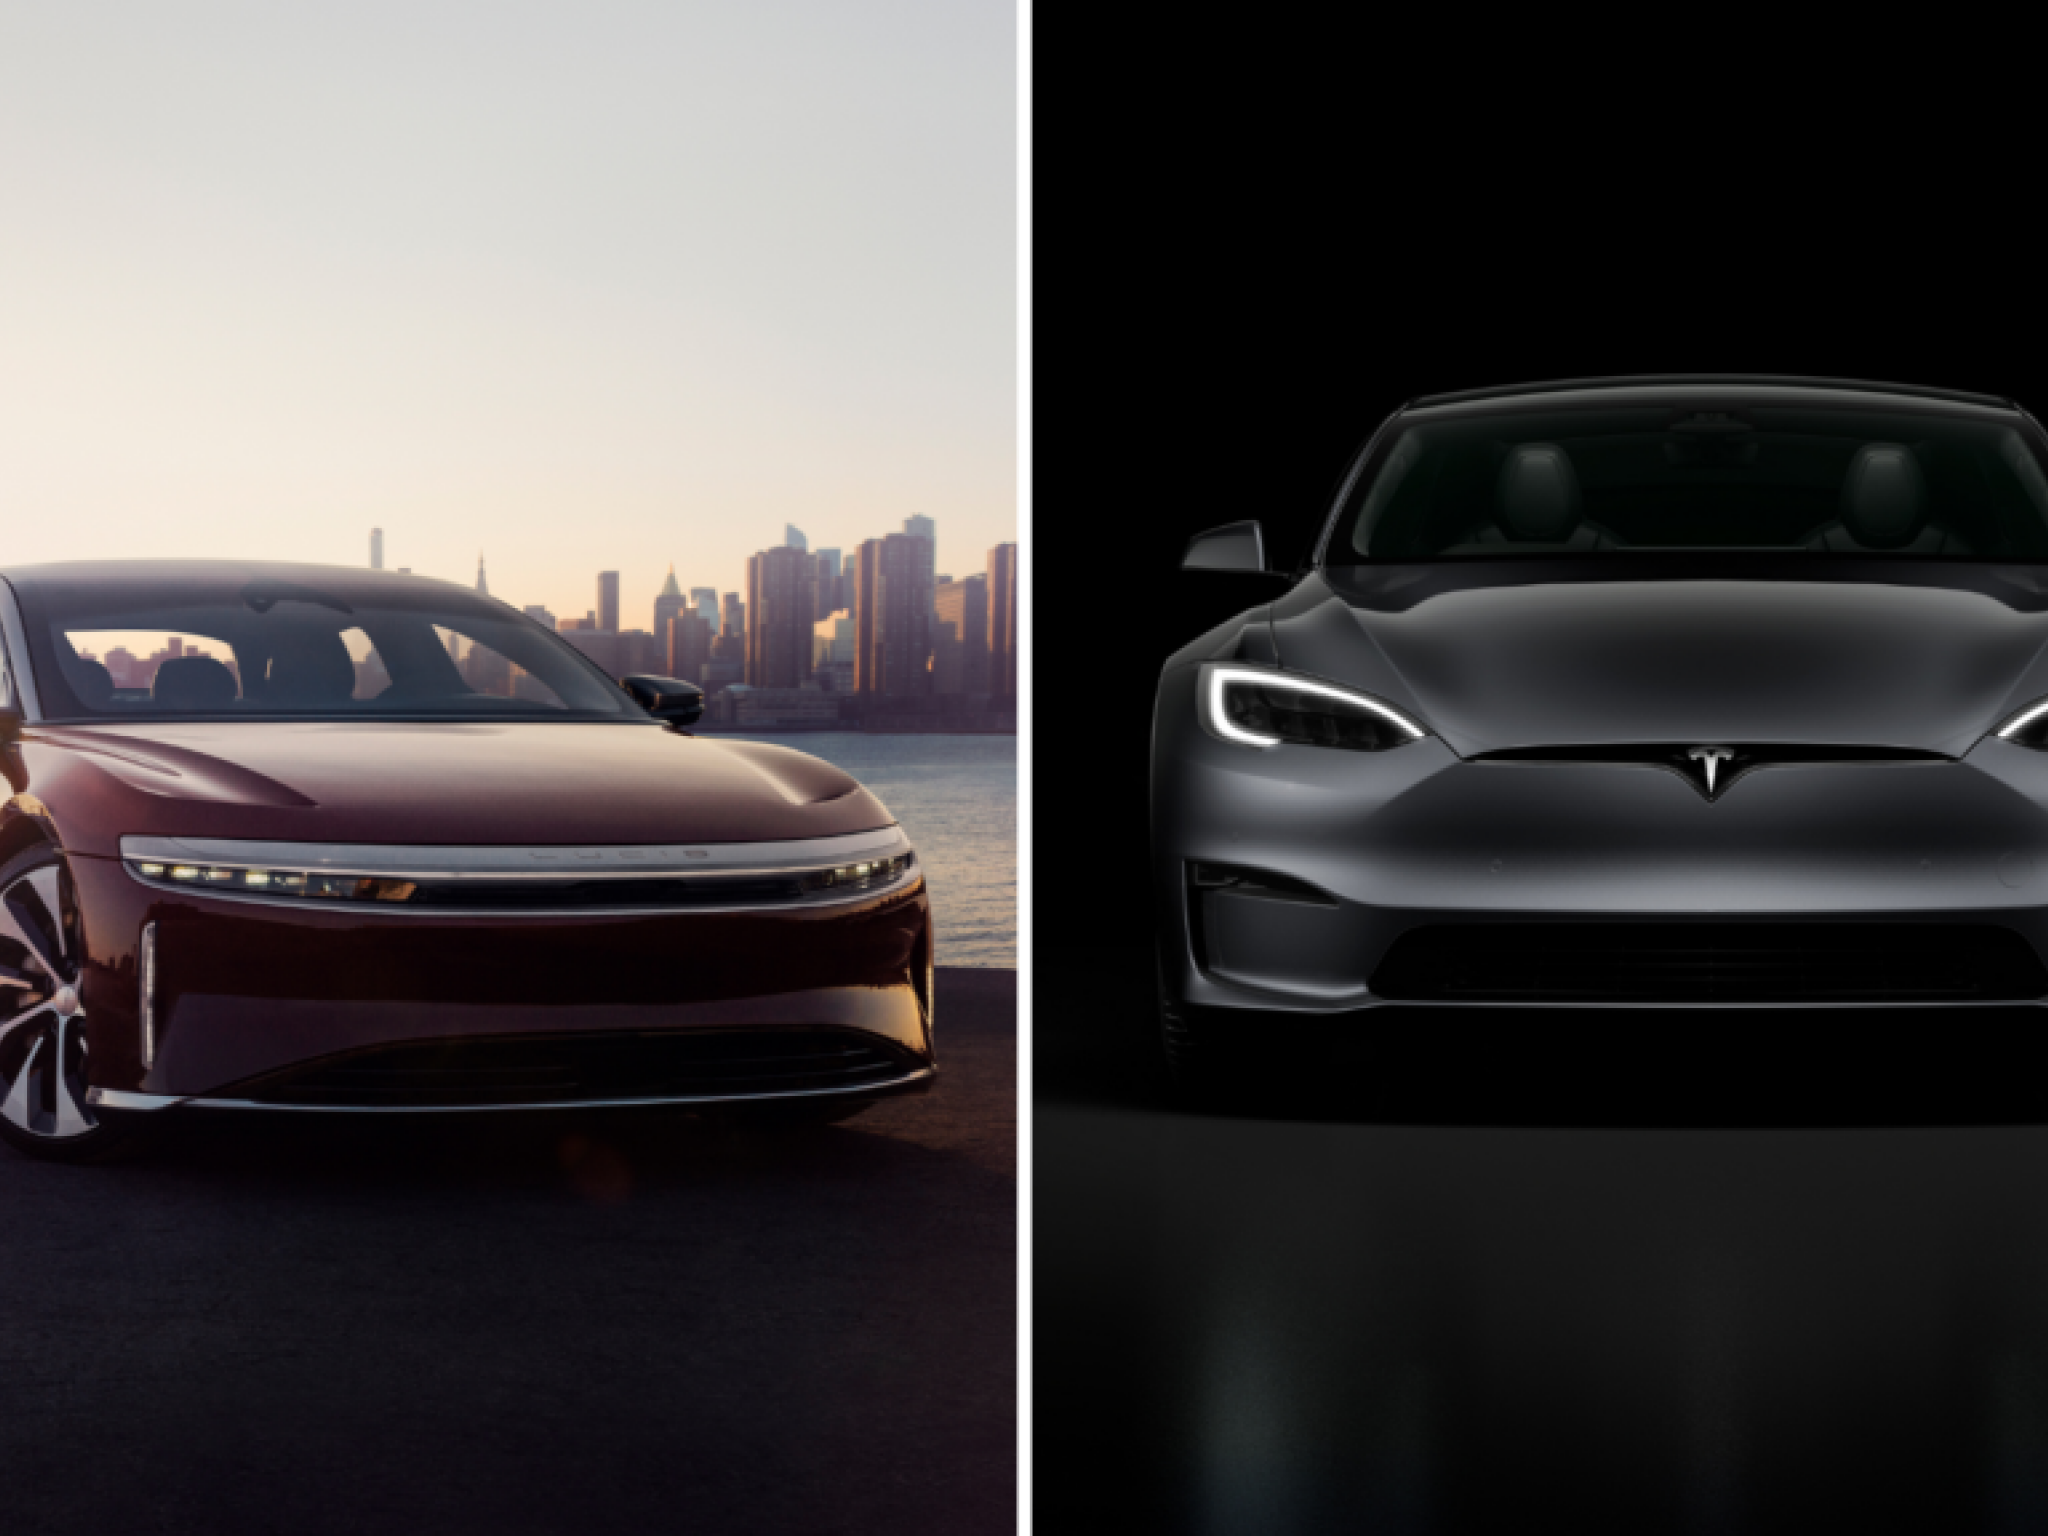  lucid-vs-tesla-ceo-says-companys-technology-is-a-number-of-years-ahead-of-ev-leader 